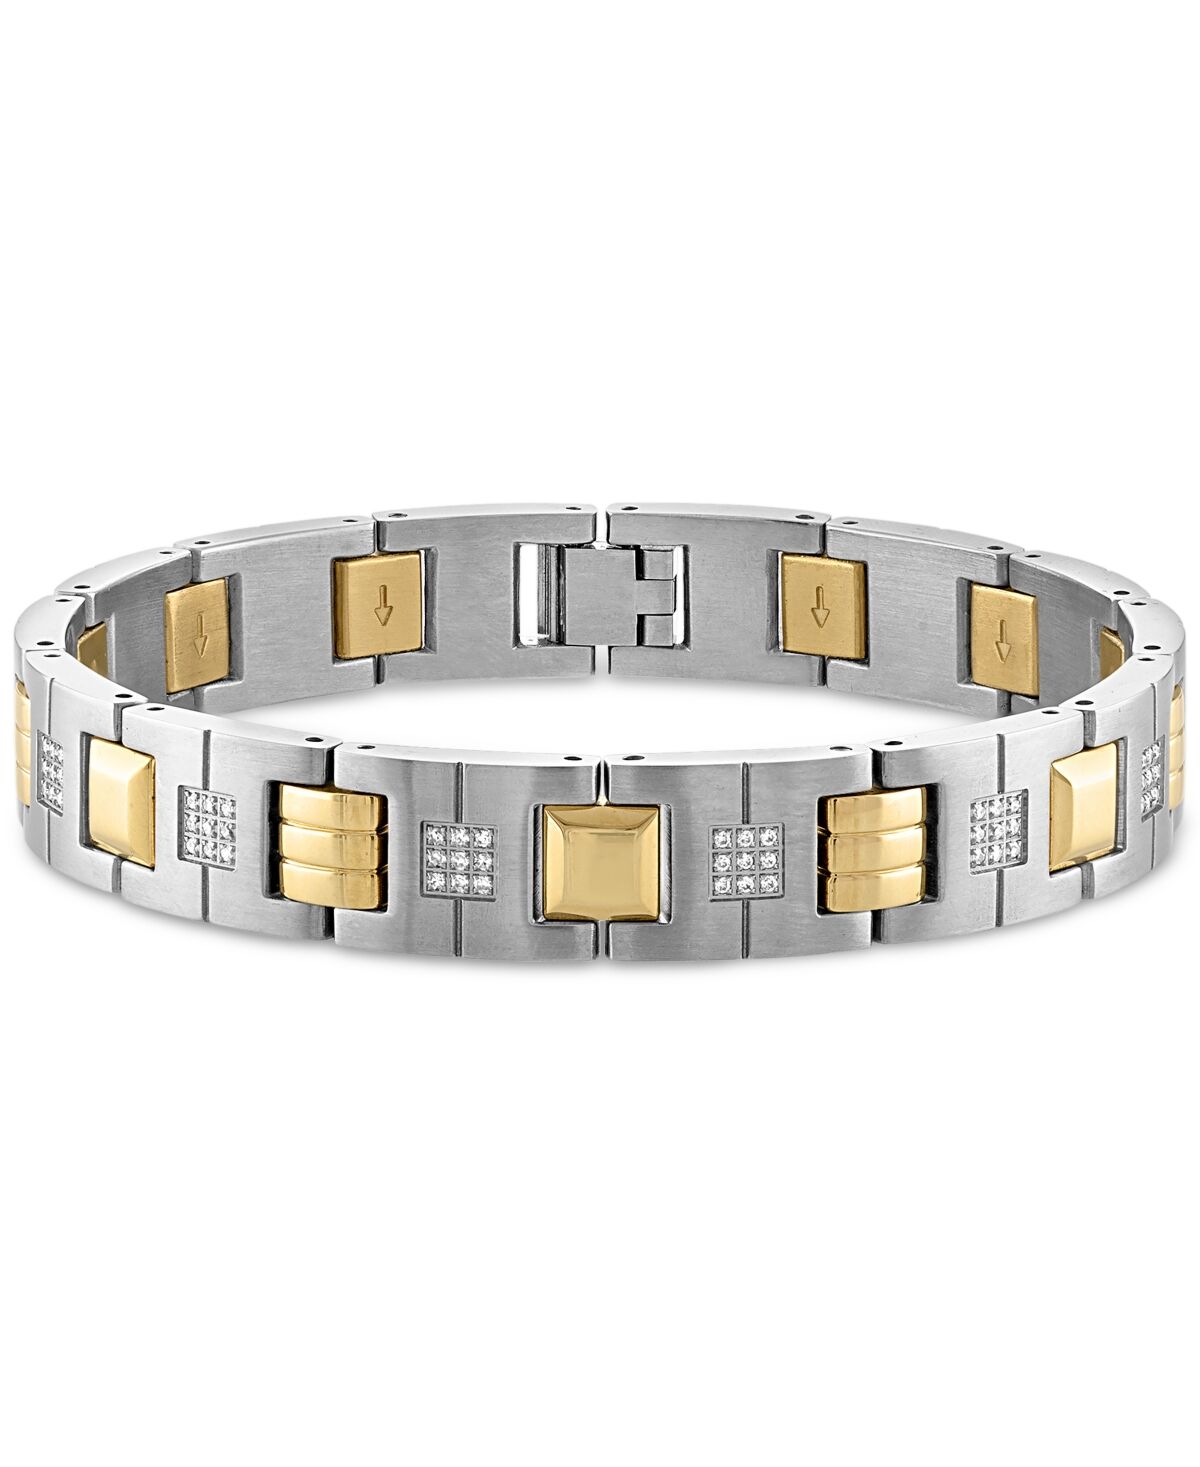 Macy's Men's Diamond Watch Link Bracelet (1/2 ct. t.w.) in Stainless Steel and Gold-Tone Ion-Plate - Steel